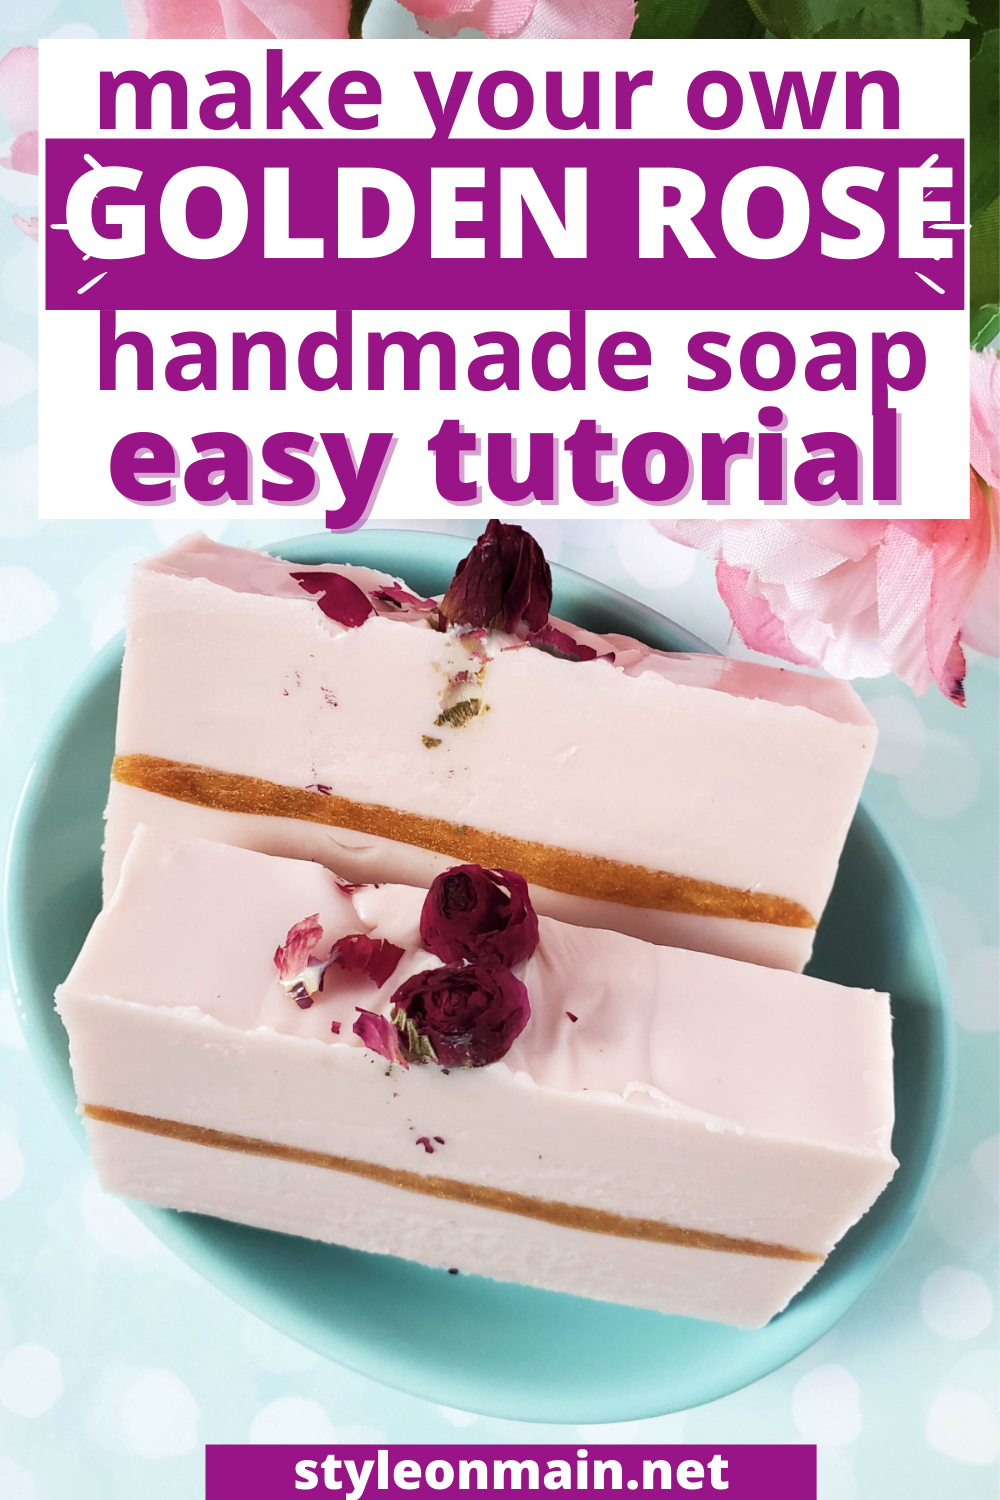 An easy to make handmade soap that's oh so luxe. This easy to follow melt and pour tutorial will have you feeling like a spamaking master in no time. Plus, the finished Golden Rose scented soap is luxurious, glamorous, and oh so moisturizing. 